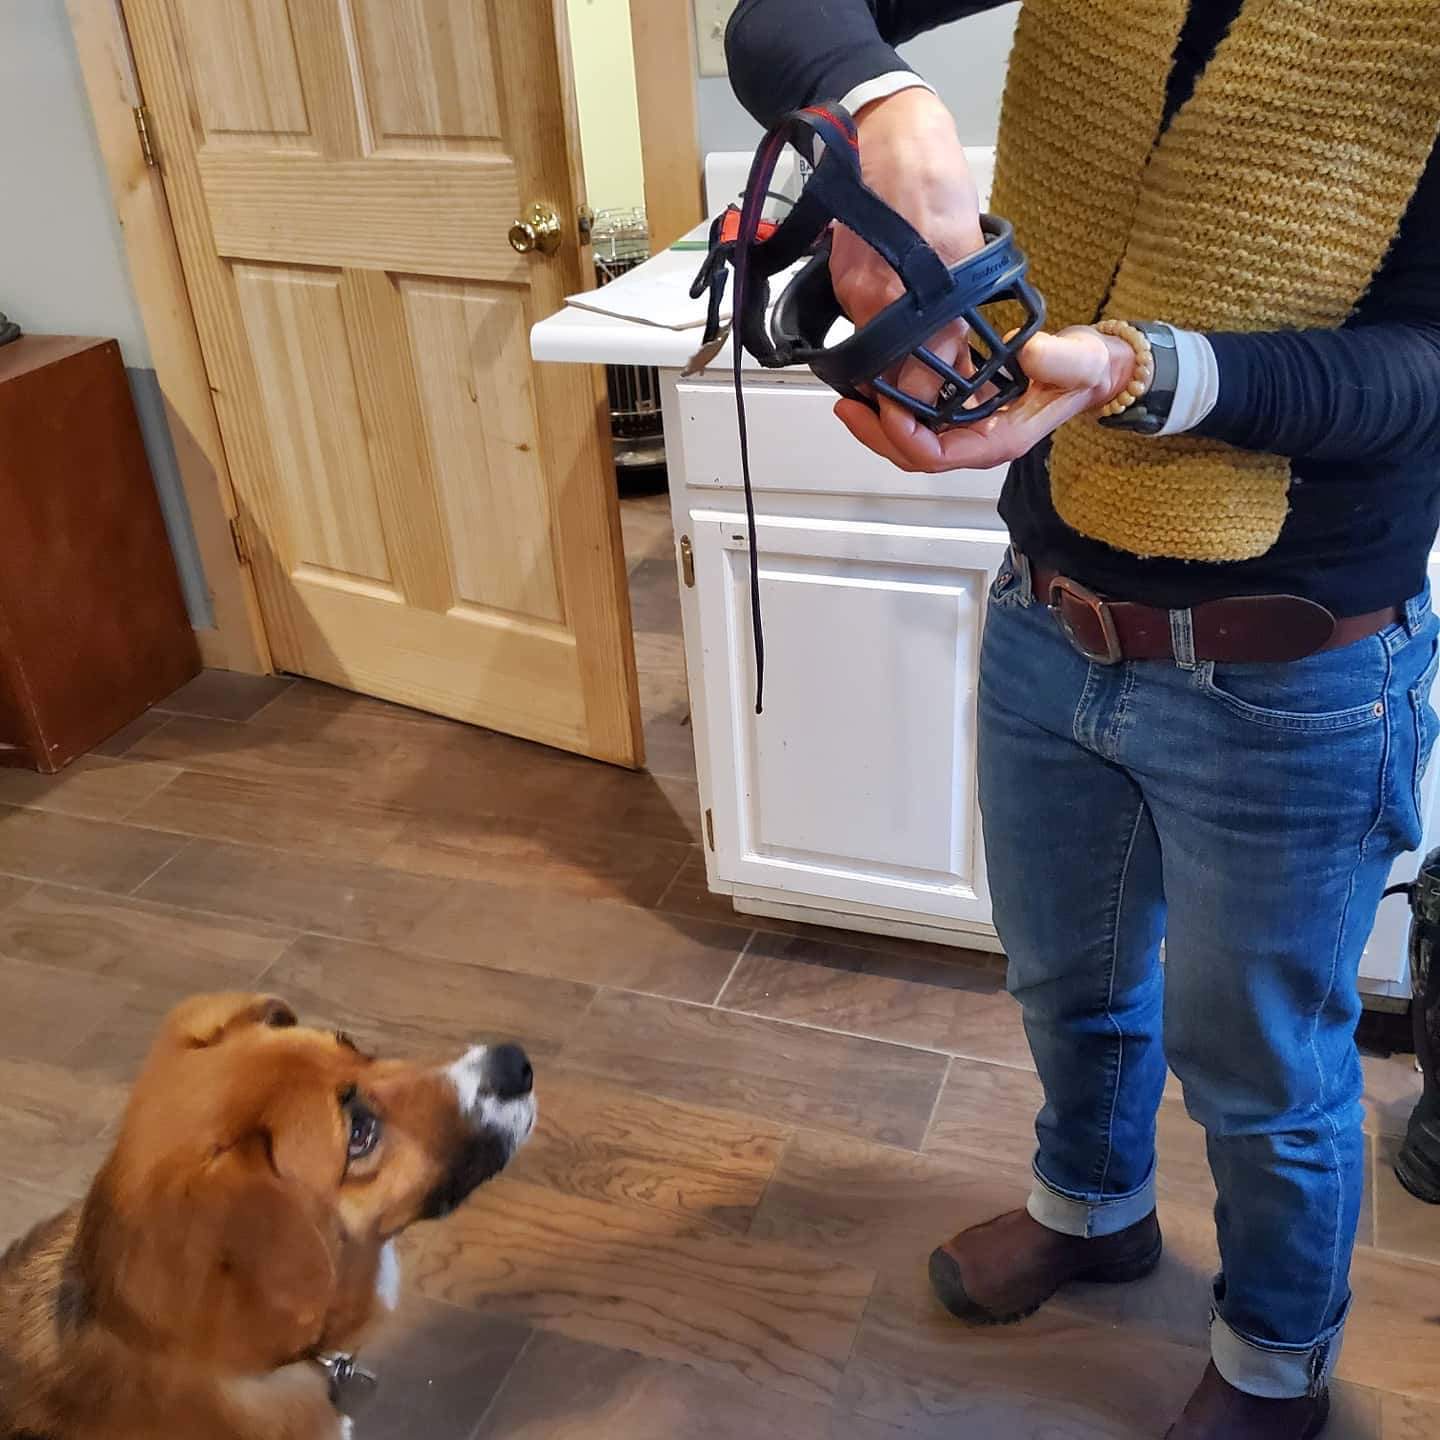 A dog sitting in front of a person as someone as they get the muzzle ready